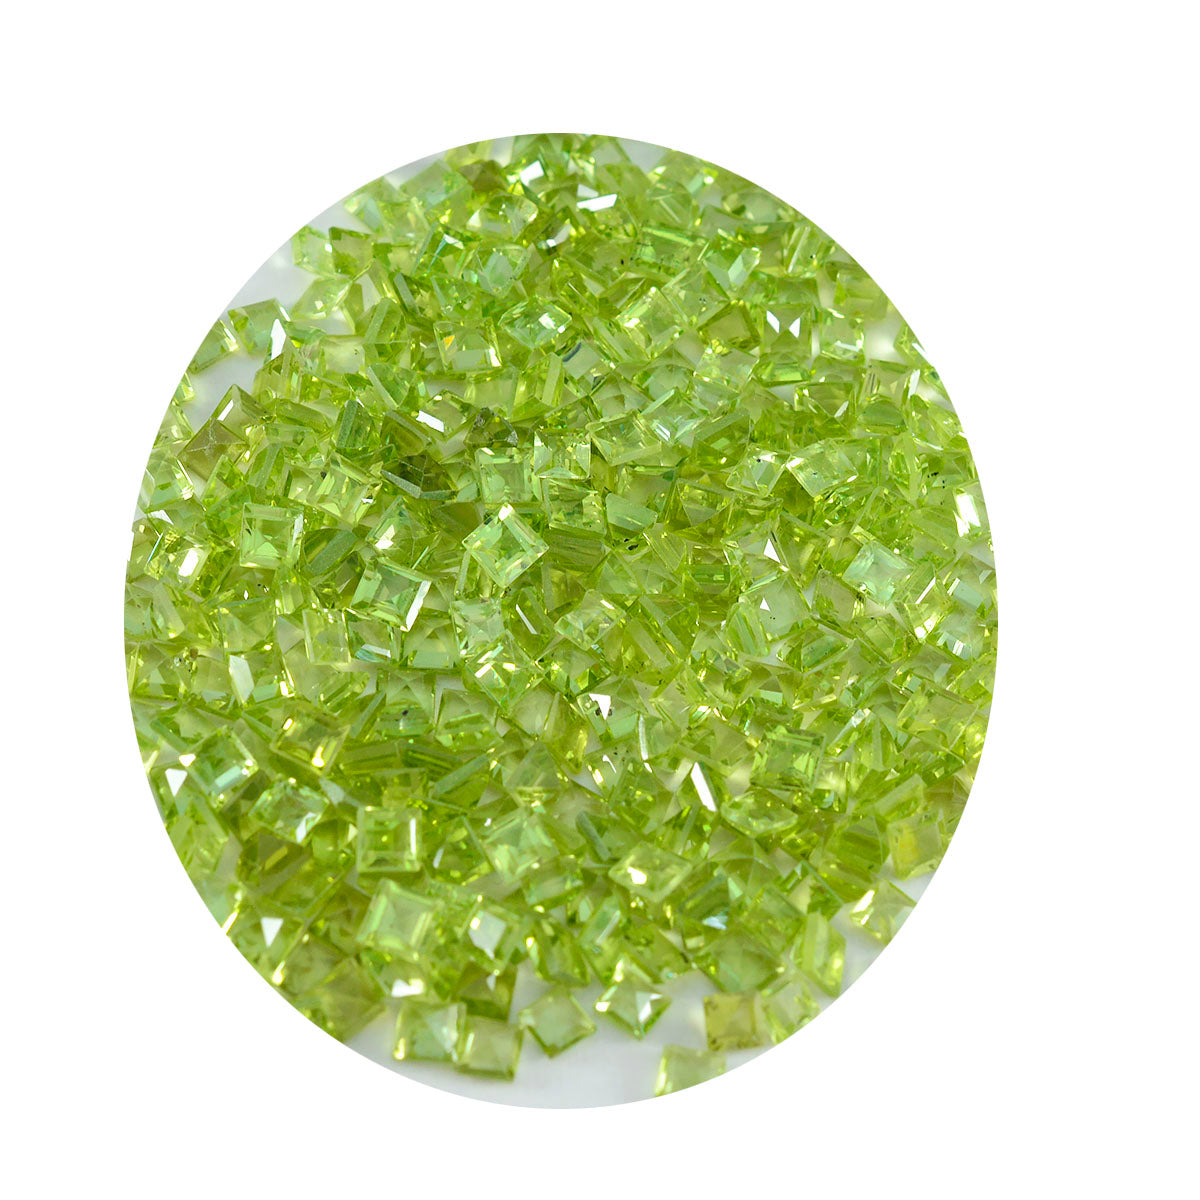 Riyogems 1PC Natural Green Peridot Faceted 4x4 mm Square Shape good-looking Quality Loose Stone